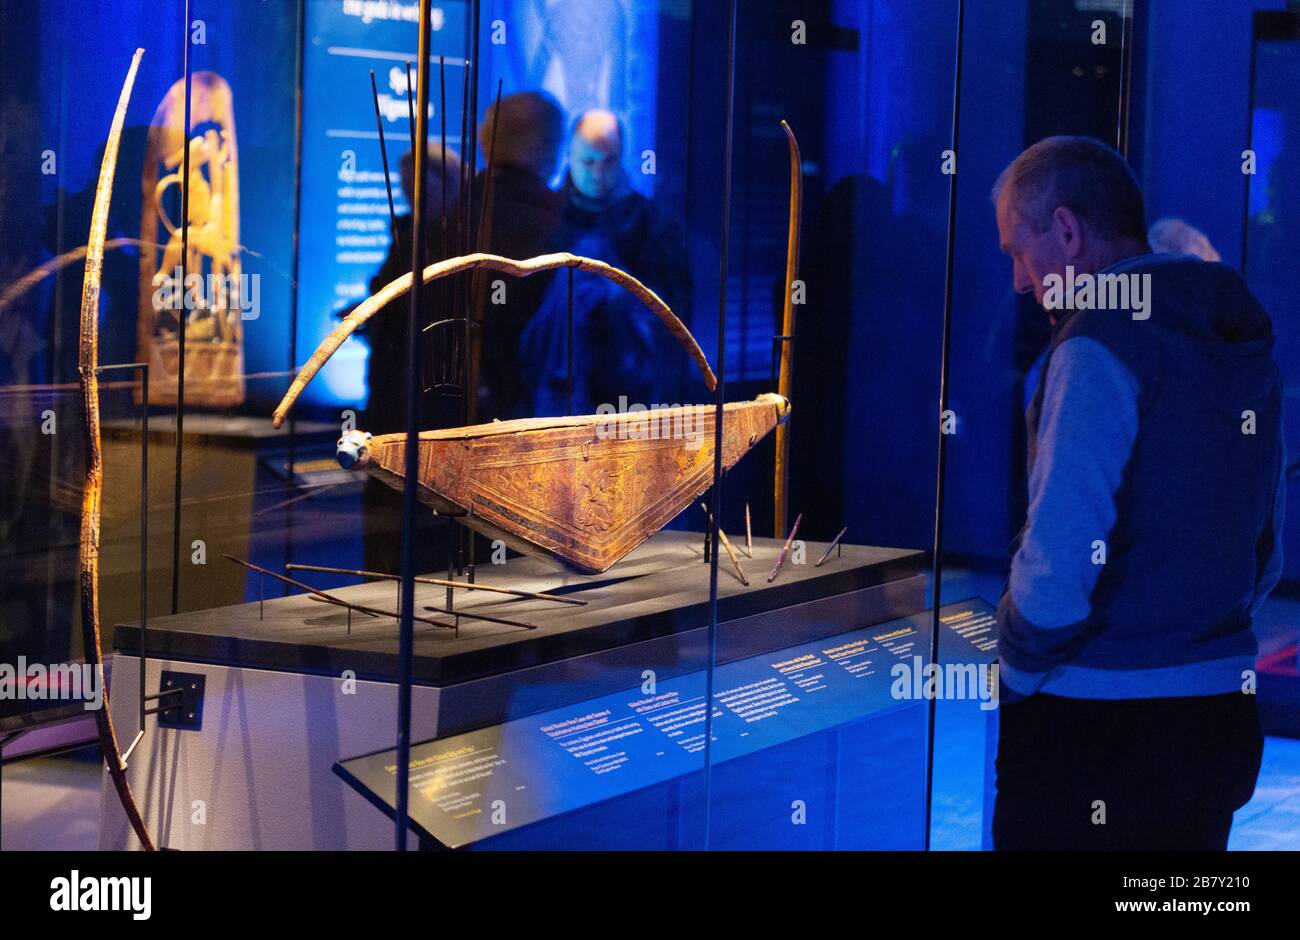 Visitors to the Tutankhamun exhibition looking at weapons from the tomb of Tutankhamen, from Ancient Egypt; Saatchi Gallery London UK Stock Photo